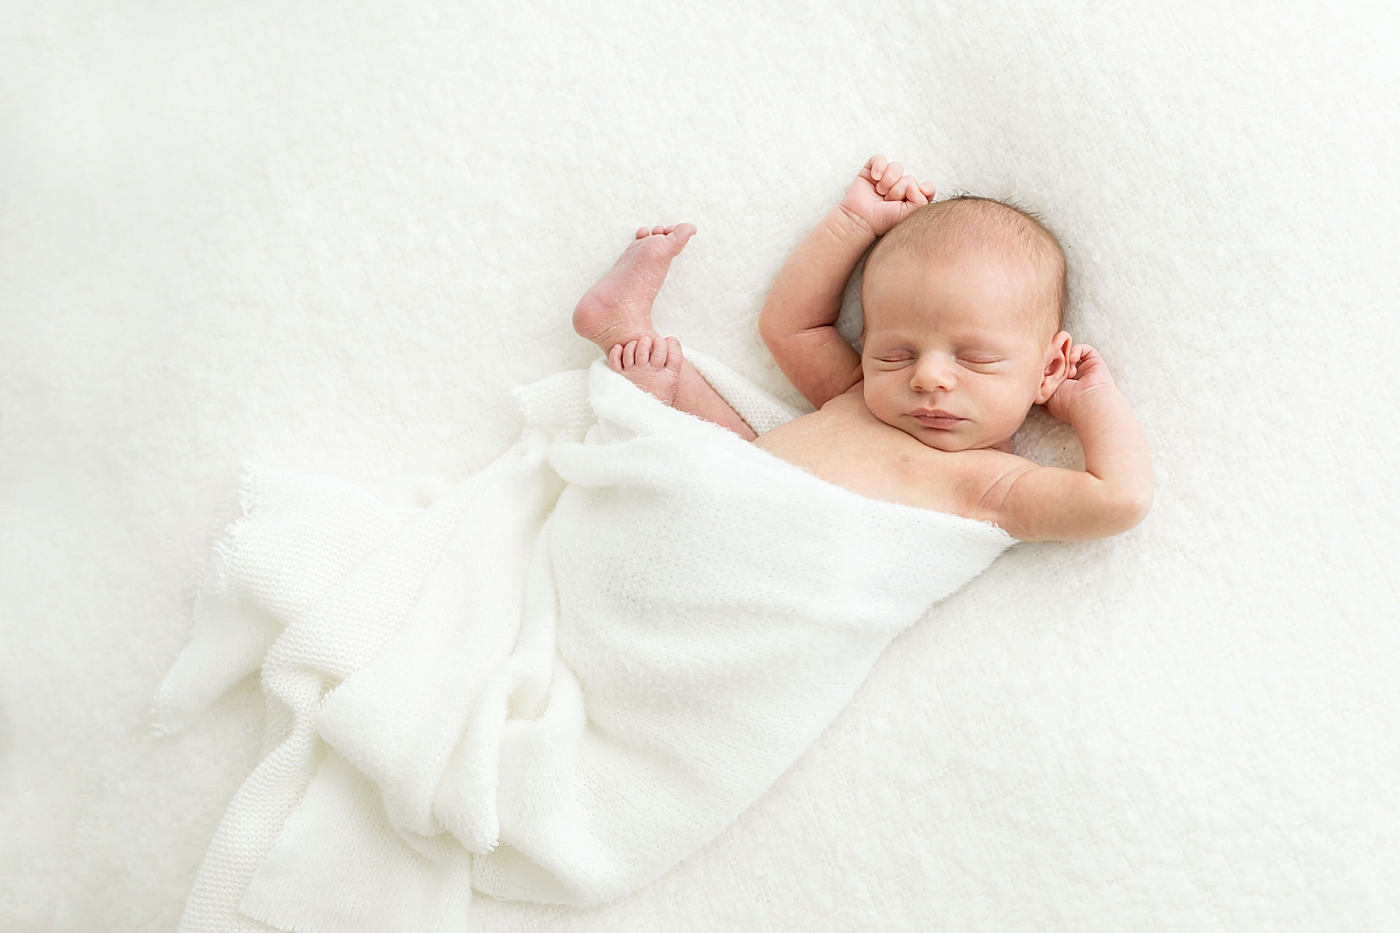 Baby sleeping with arms up by his head. Photos by Fresh Light Photography.